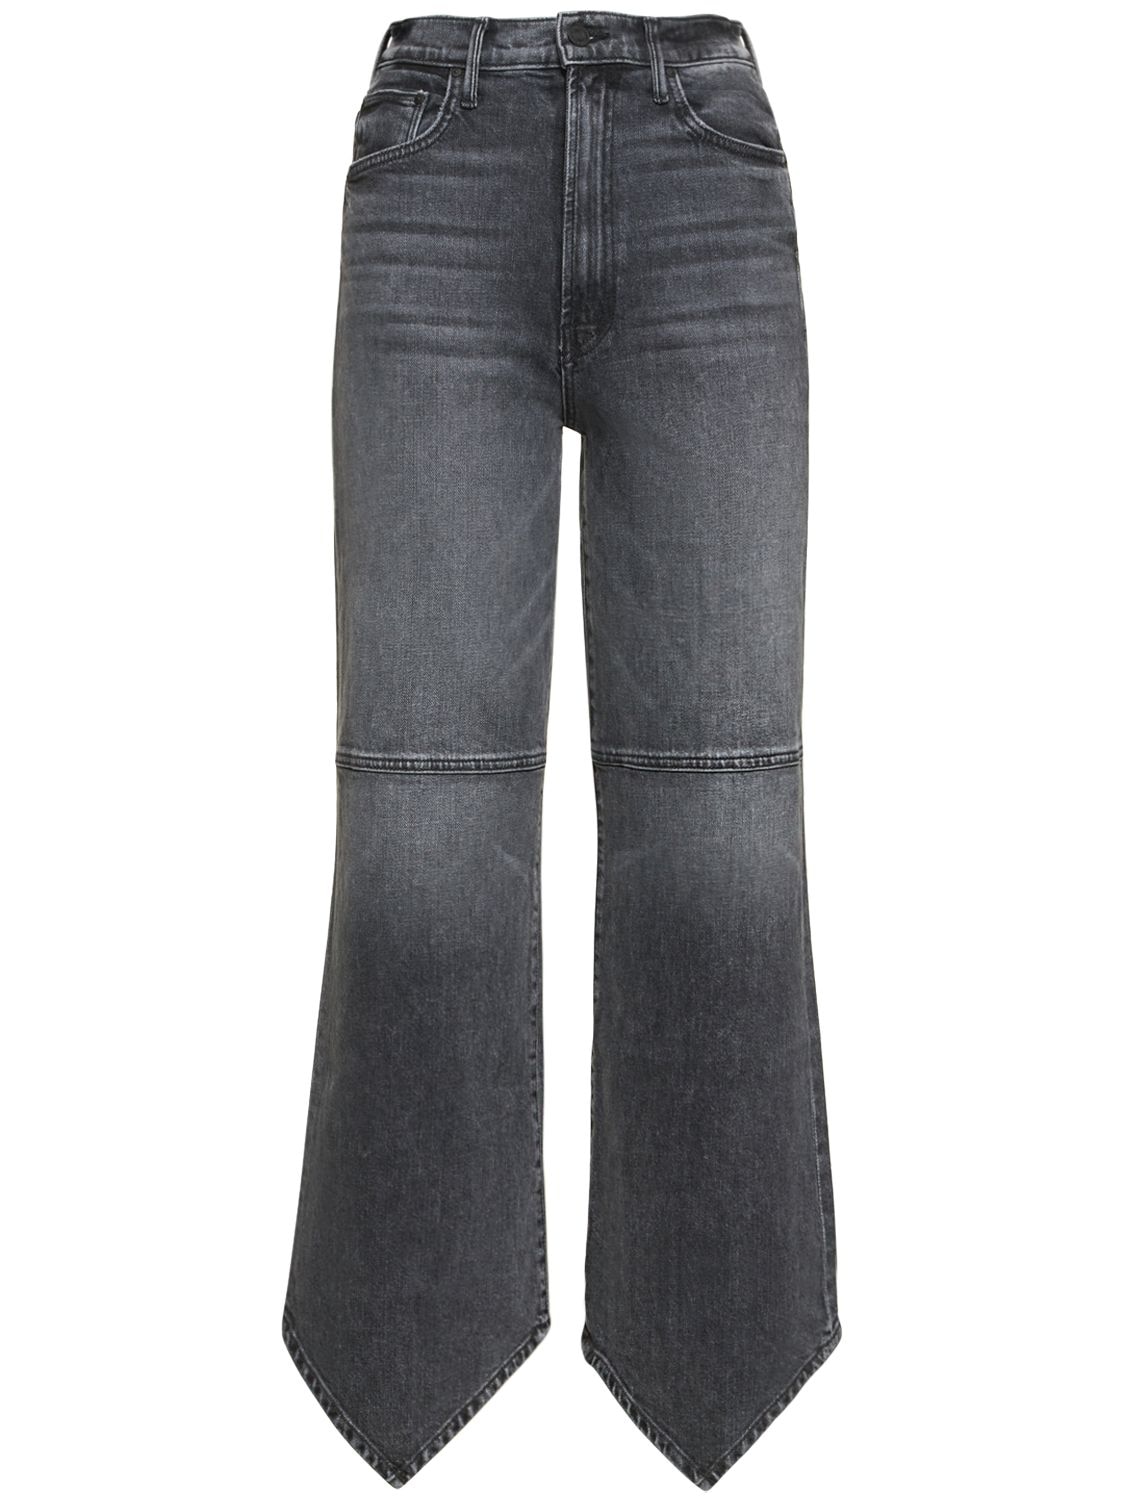 MOTHER THE DAGGER FLOOD STRETCH JEANS